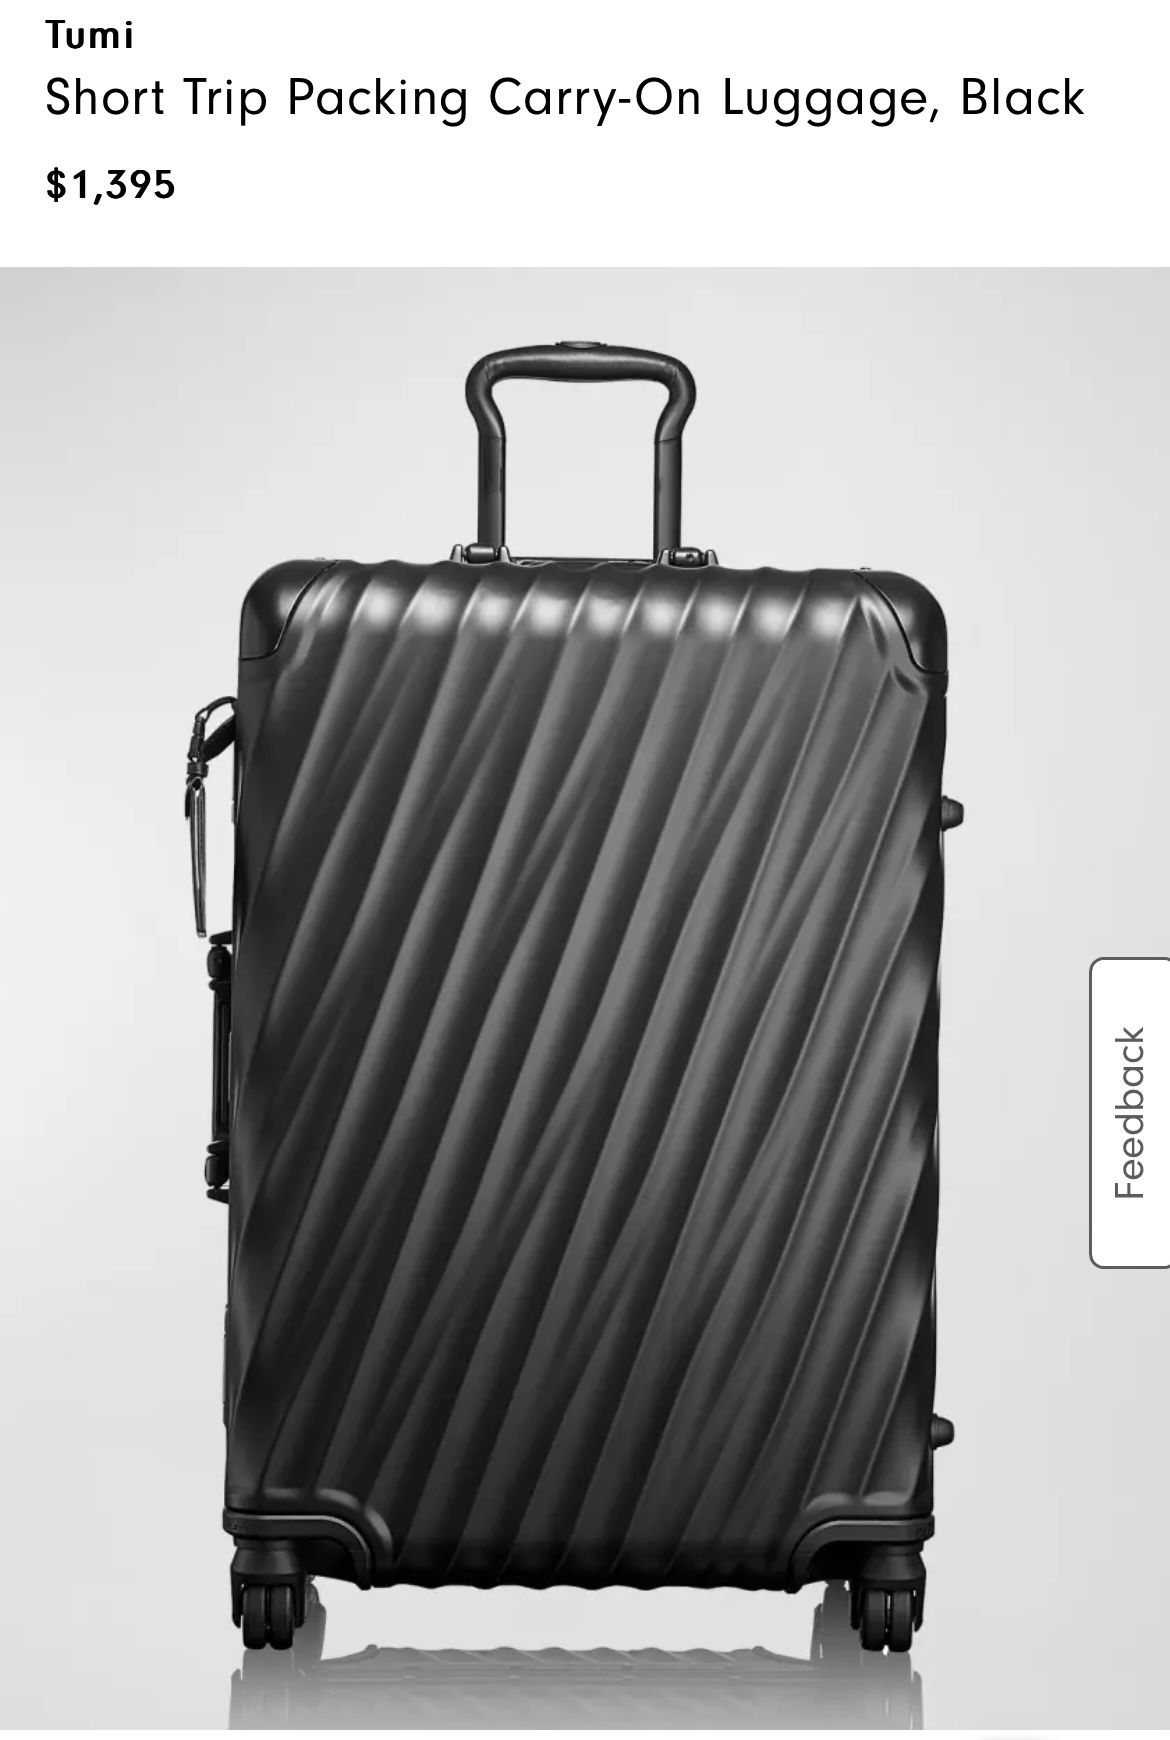 TUMI Short Trip Packing Carry-On Luggage 